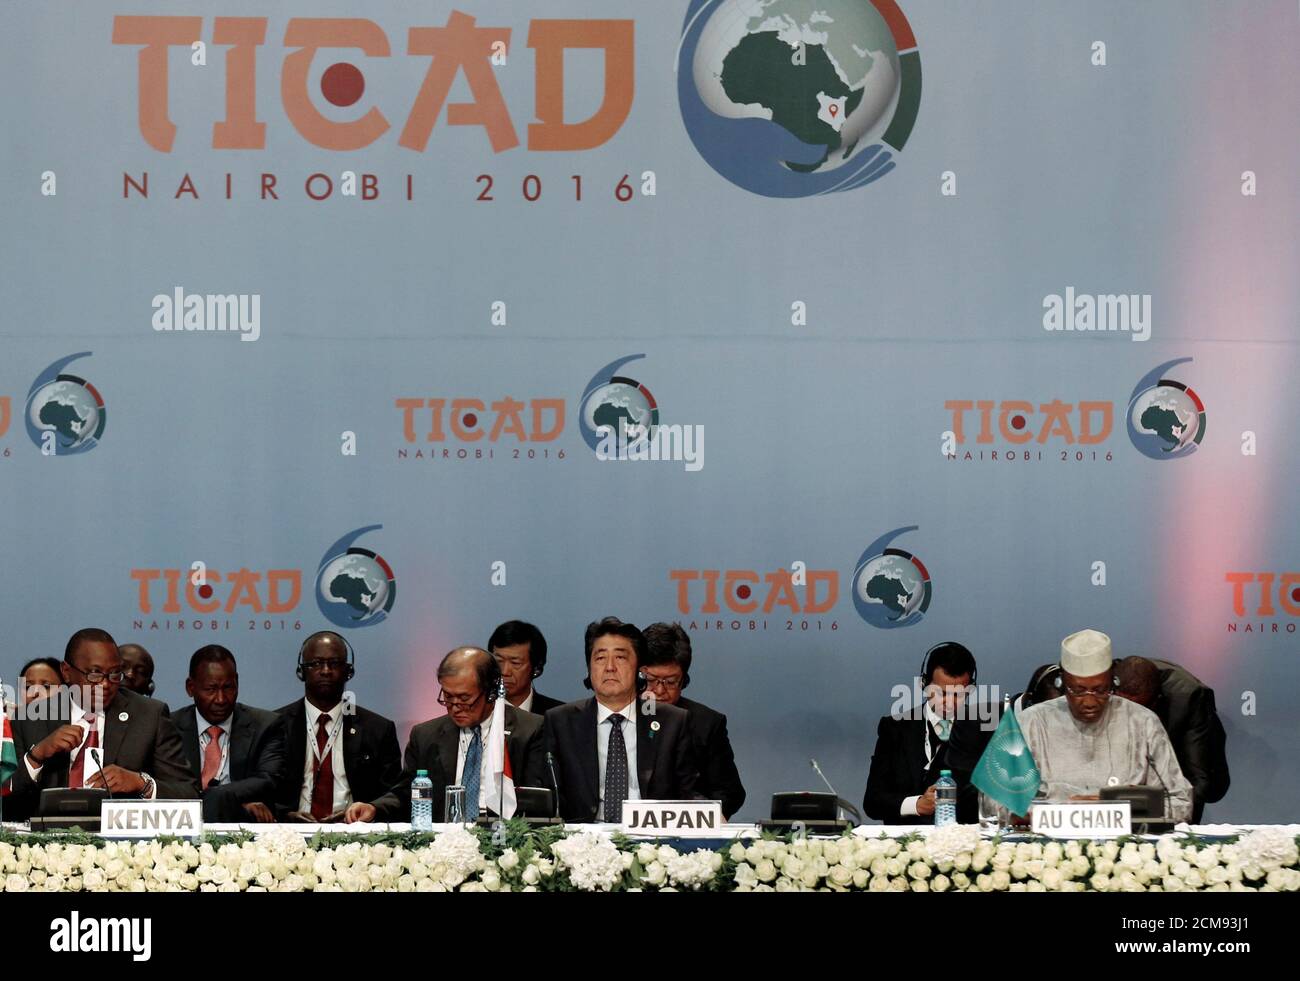 Japan's Prime Minister Shinzo Abe (C), flanked by Kenya's President Uhuru Kenyatta (L) and Chairperson of the African Union (AU) and Chad's President Idriss Deby (R), attend the Sixth Tokyo International Conference on African Development (TICAD VI), in Kenya's capital Nairobi, August 27, 2016. REUTERS/Thomas Mukoya Stock Photo